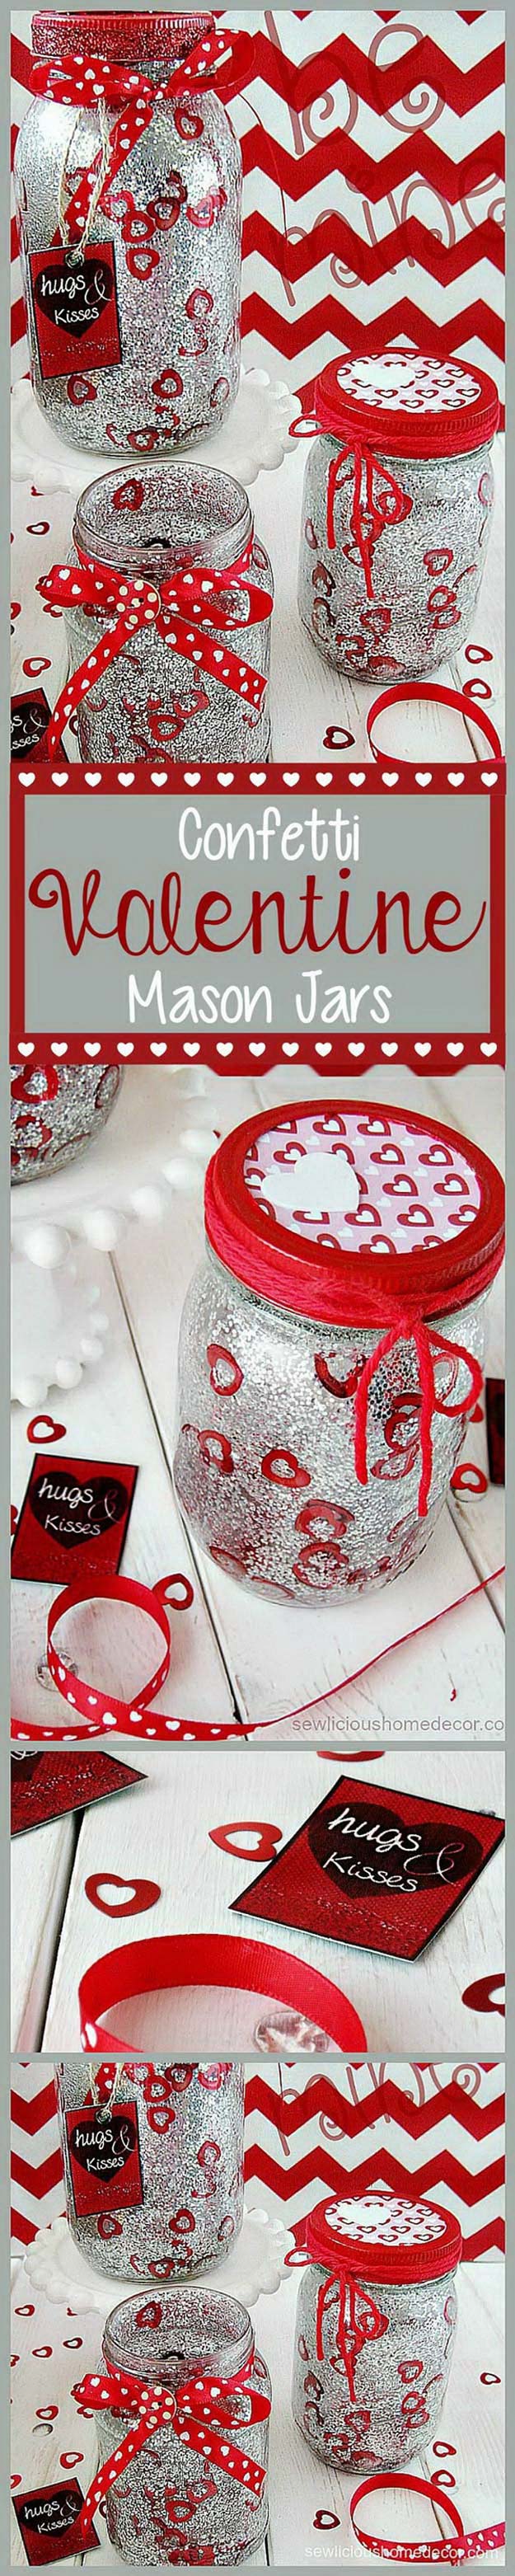 Best Mason Jar Valentine Crafts - Red Valentine Jars with Glitter and Confetti - Cute Mason Jar Valentines Day Gifts and Crafts | Easy DIY Ideas for Valentines Day for Homemade Gift Giving and Room Decor | Creative Home Decor and Craft Projects for Teens, Teenagers, Kids and Adults 